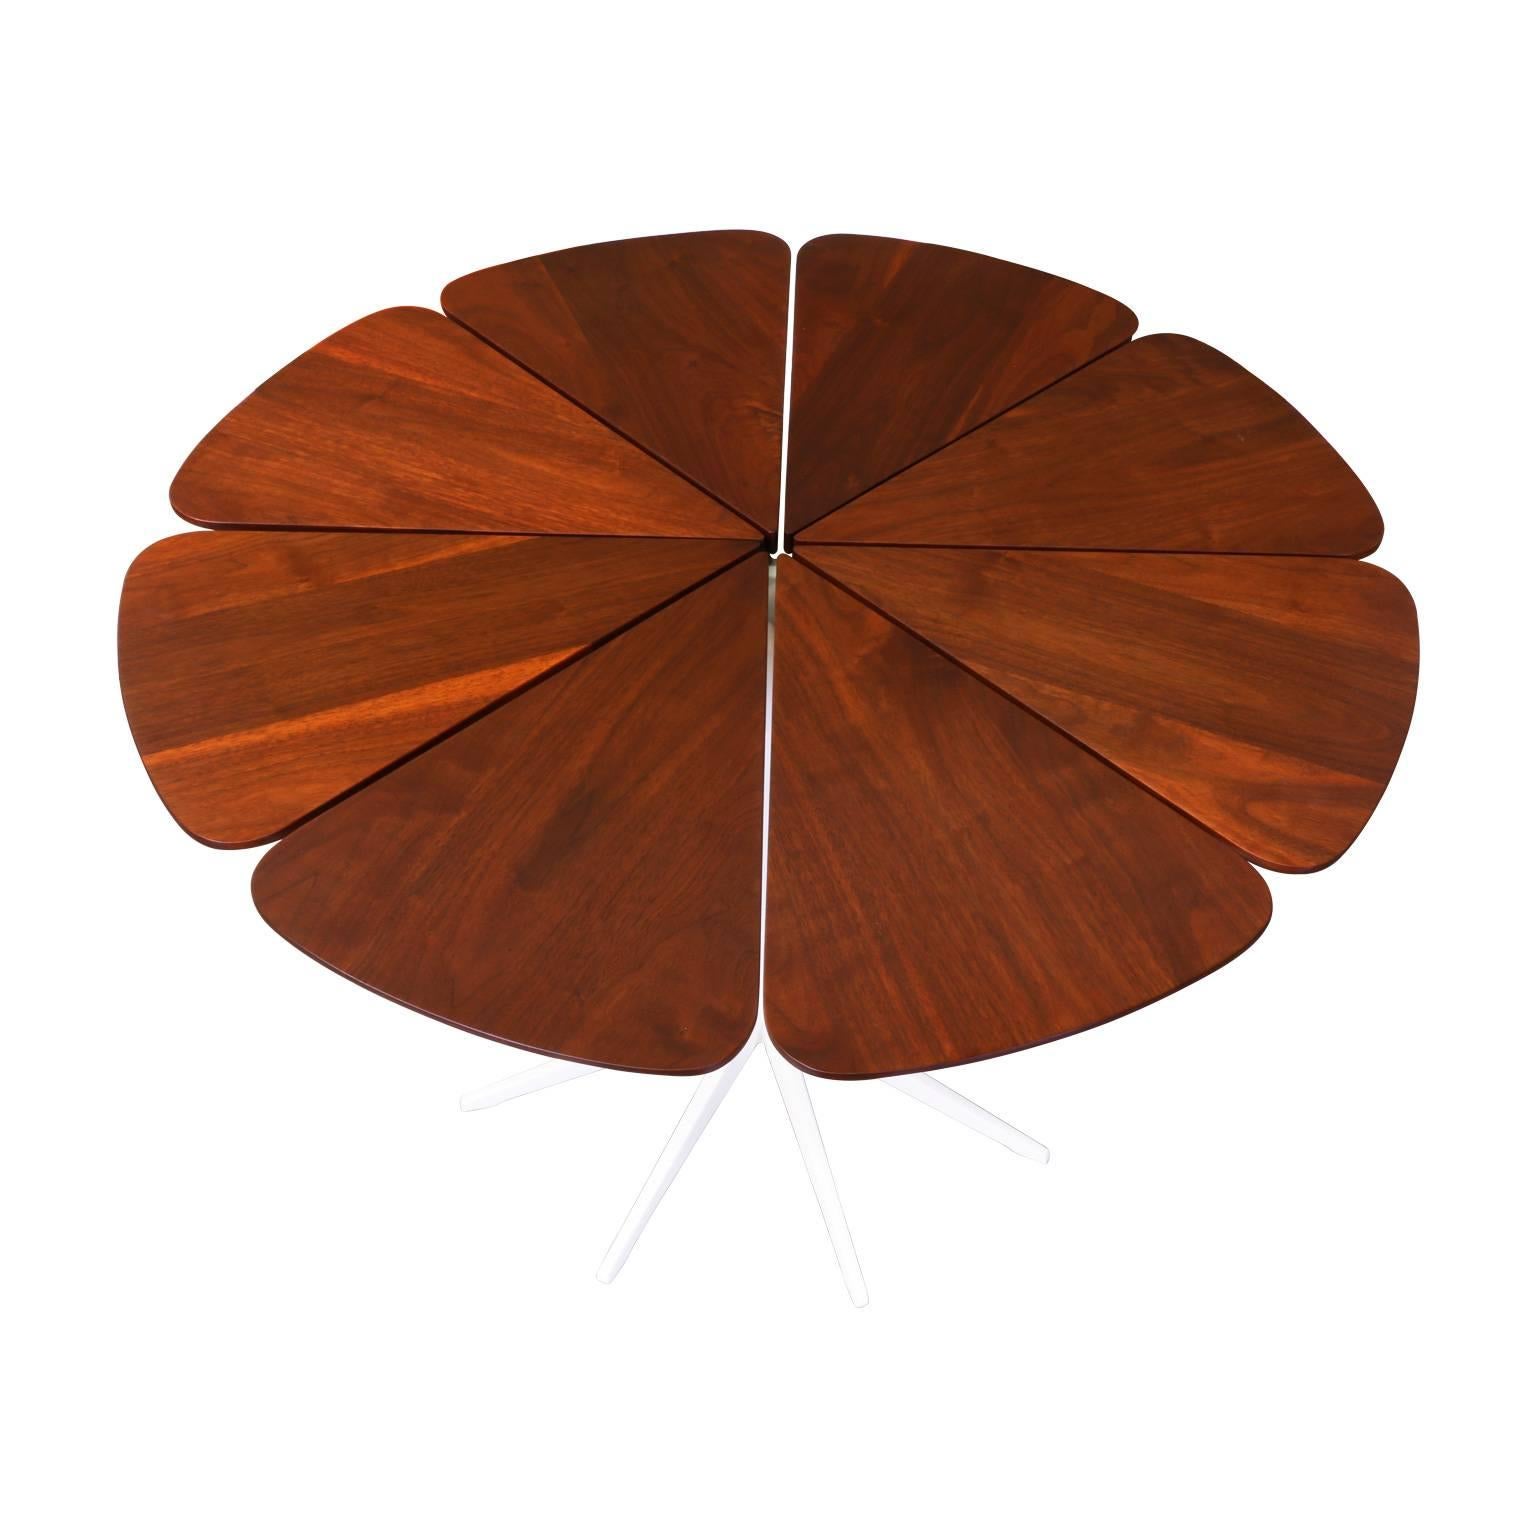 American Richard Schultz “Petal” Dining Table for Knoll